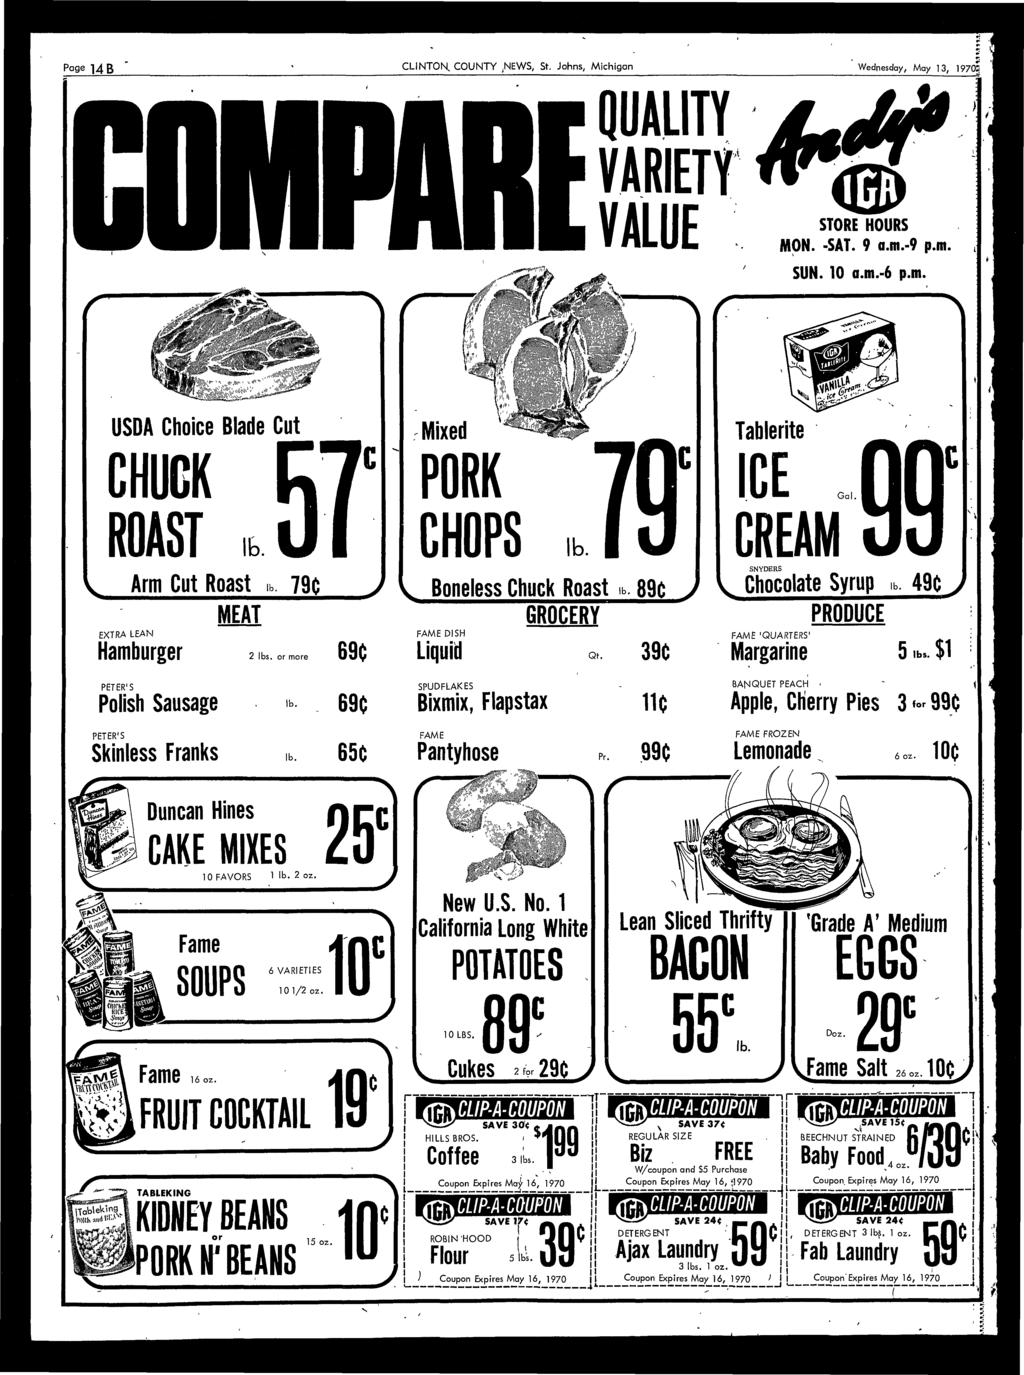 Page ]4 f$ CLINTON, COUNTY.NEWS, St. Johns, Michigan Wednesday, May, 197o QUALITY VARIETY A <m STORE HOURS MON. -SAT. 9 a.m.-9 p.m. * # SUN. a.m.-6 p.m. lb. Tahlerite ICE CREAM SNYDERS lb.